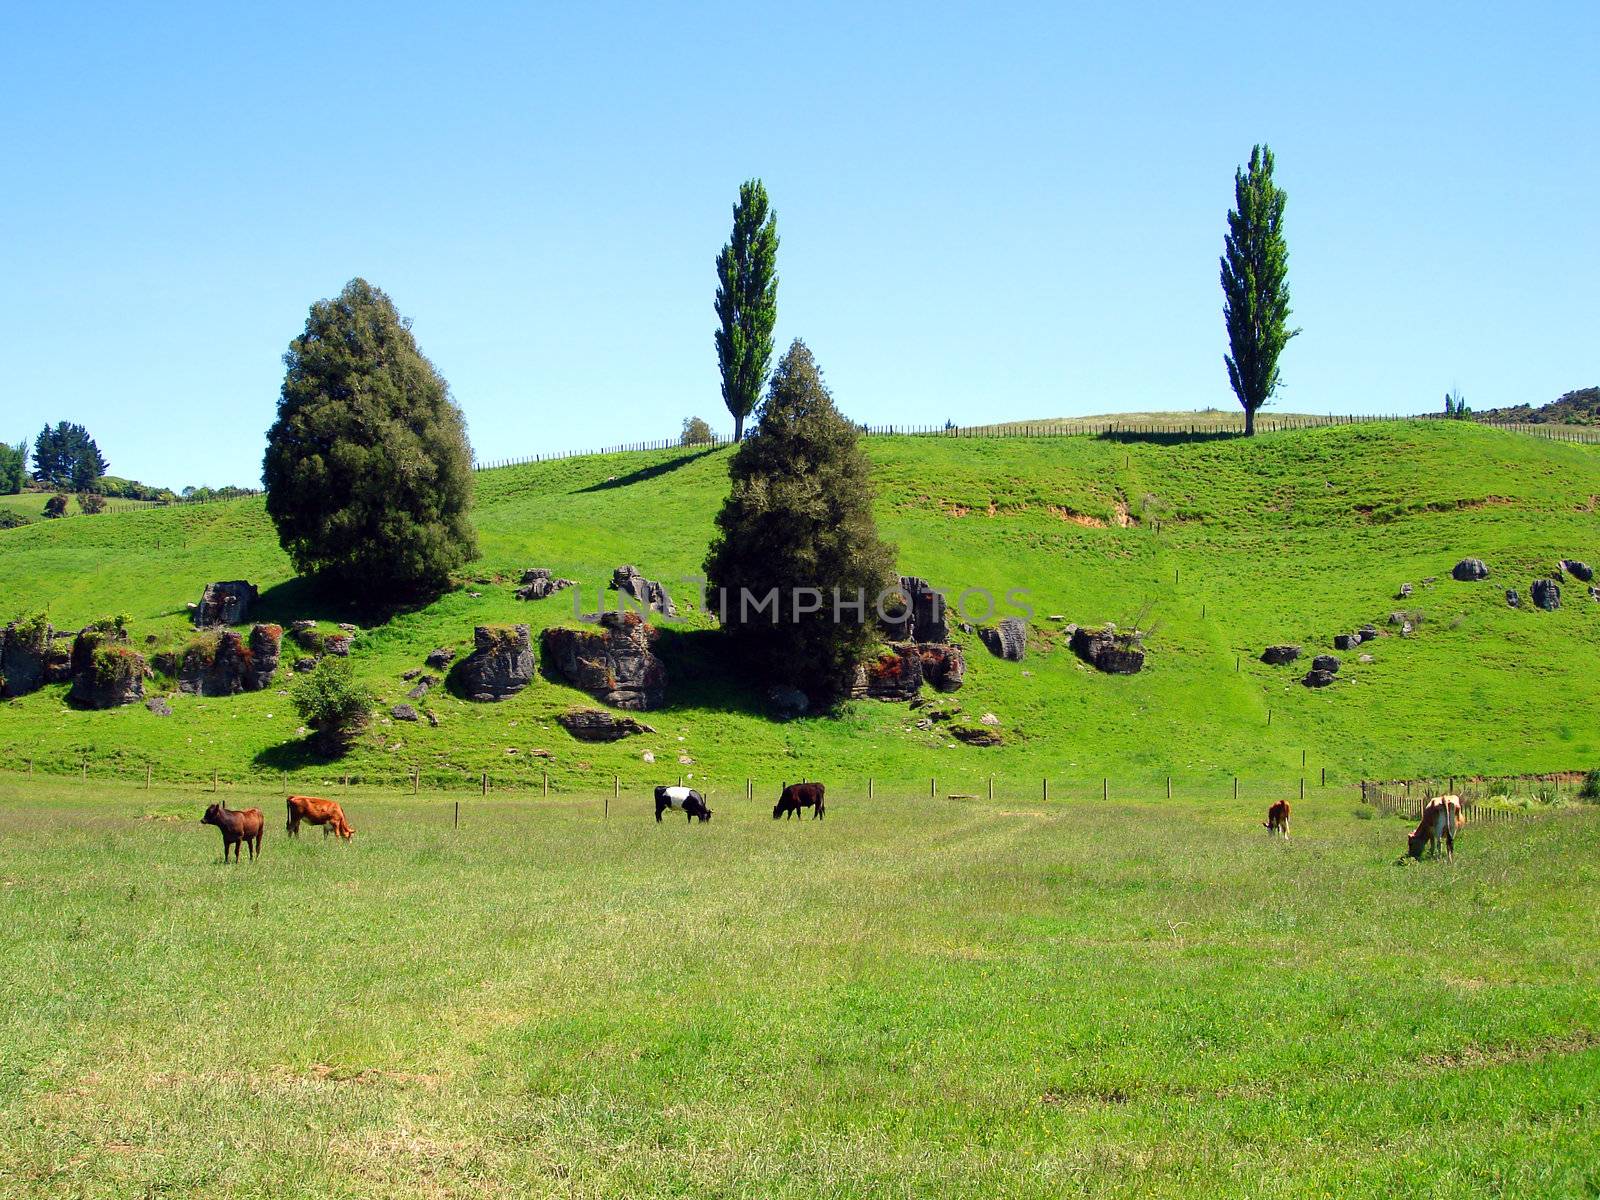 Field of Cows, Waitomo, New Zealand by Cloudia